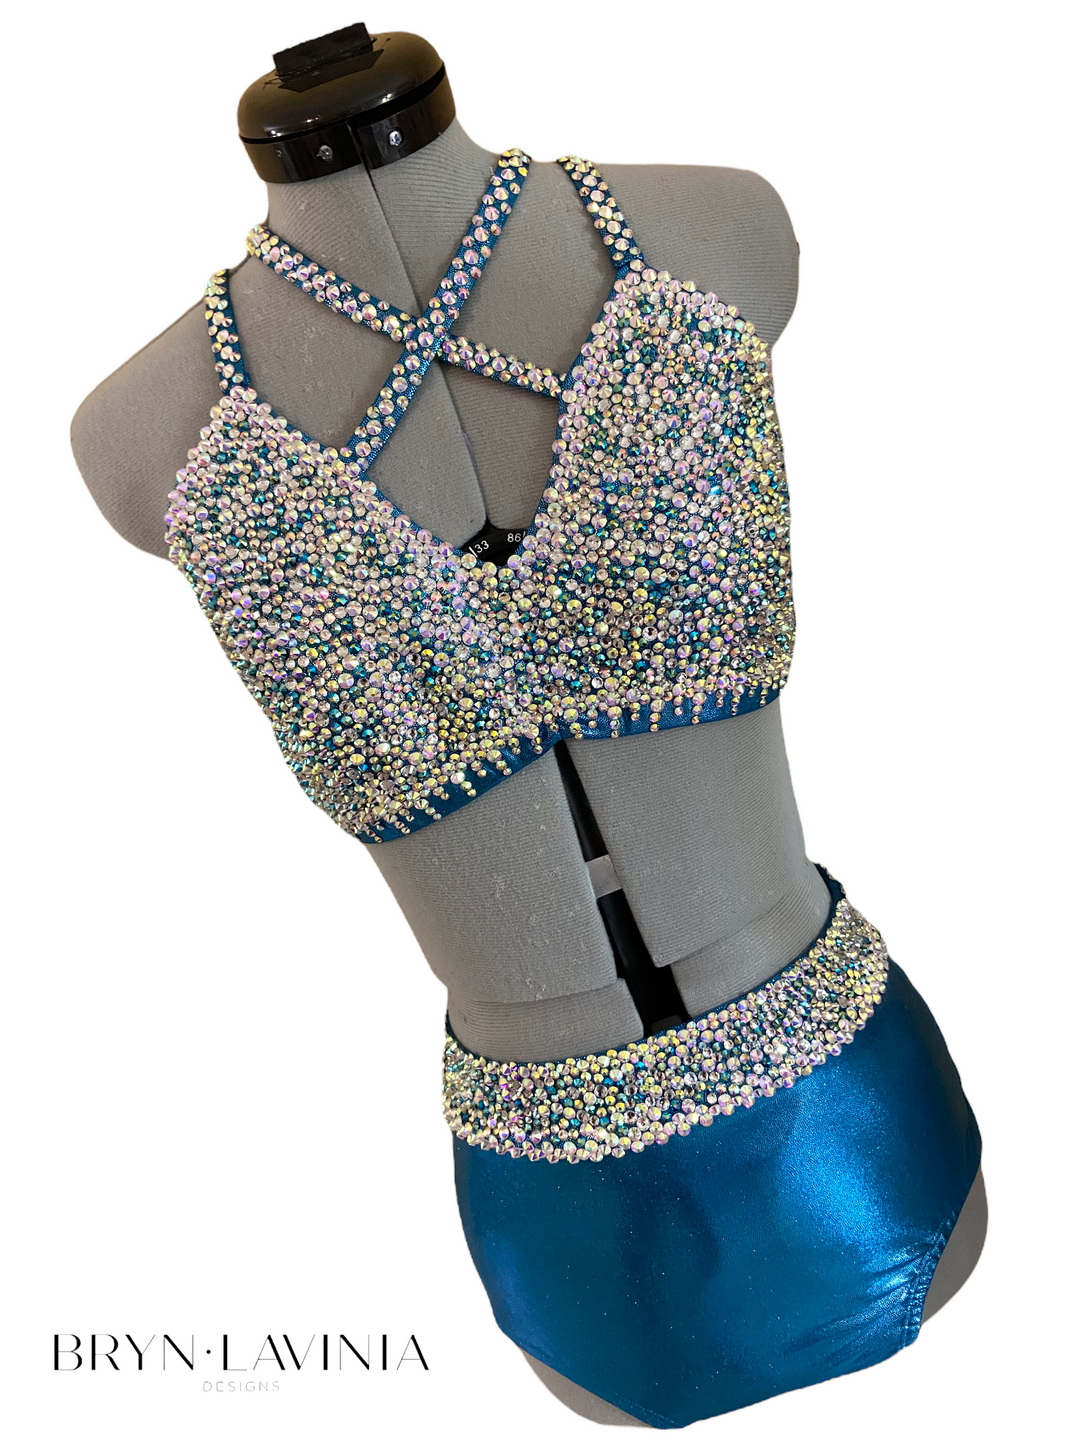 NEW Adult Small Ready-to-Ship metallic blue jazz costume